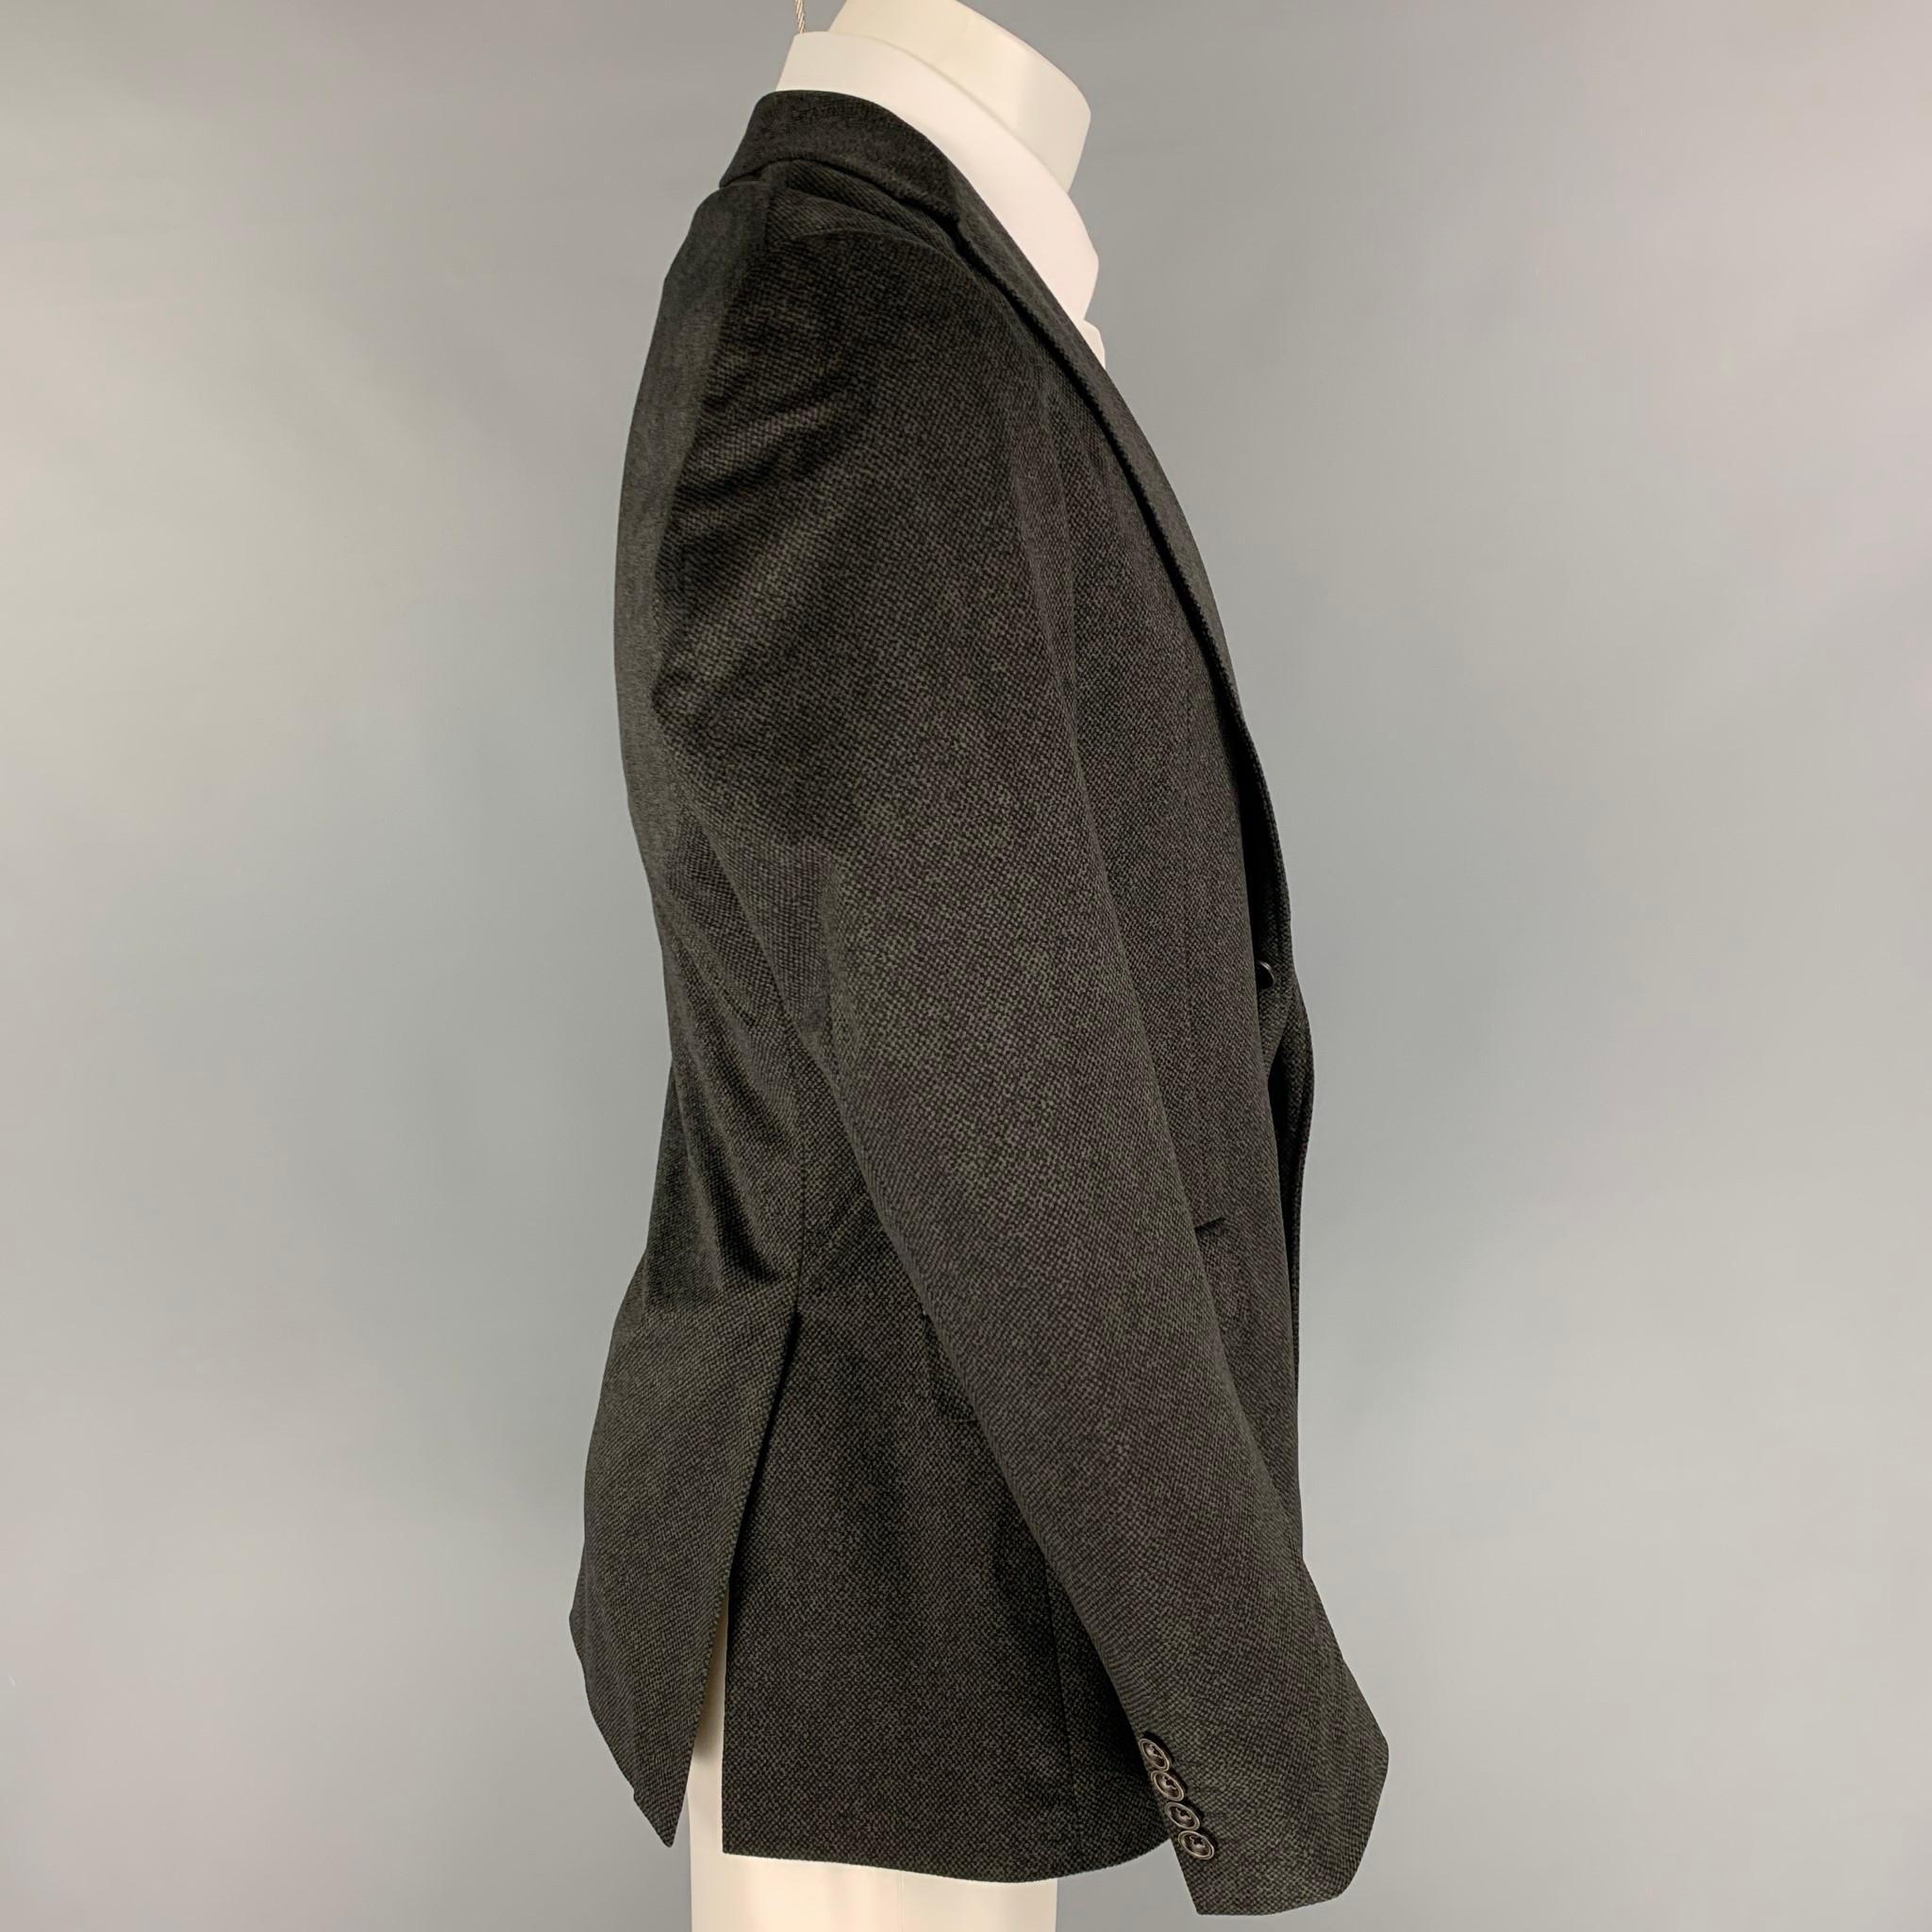 ARMANI COLLEZIONI sport coat comes in a charcoal / black polyester with a full liner featuring a notch lapel, flap pockets, double back vent, and a double button closure. 

Very Good Pre-Owned Condition.
Marked: 40

Measurements:

Shoulder: 17.5